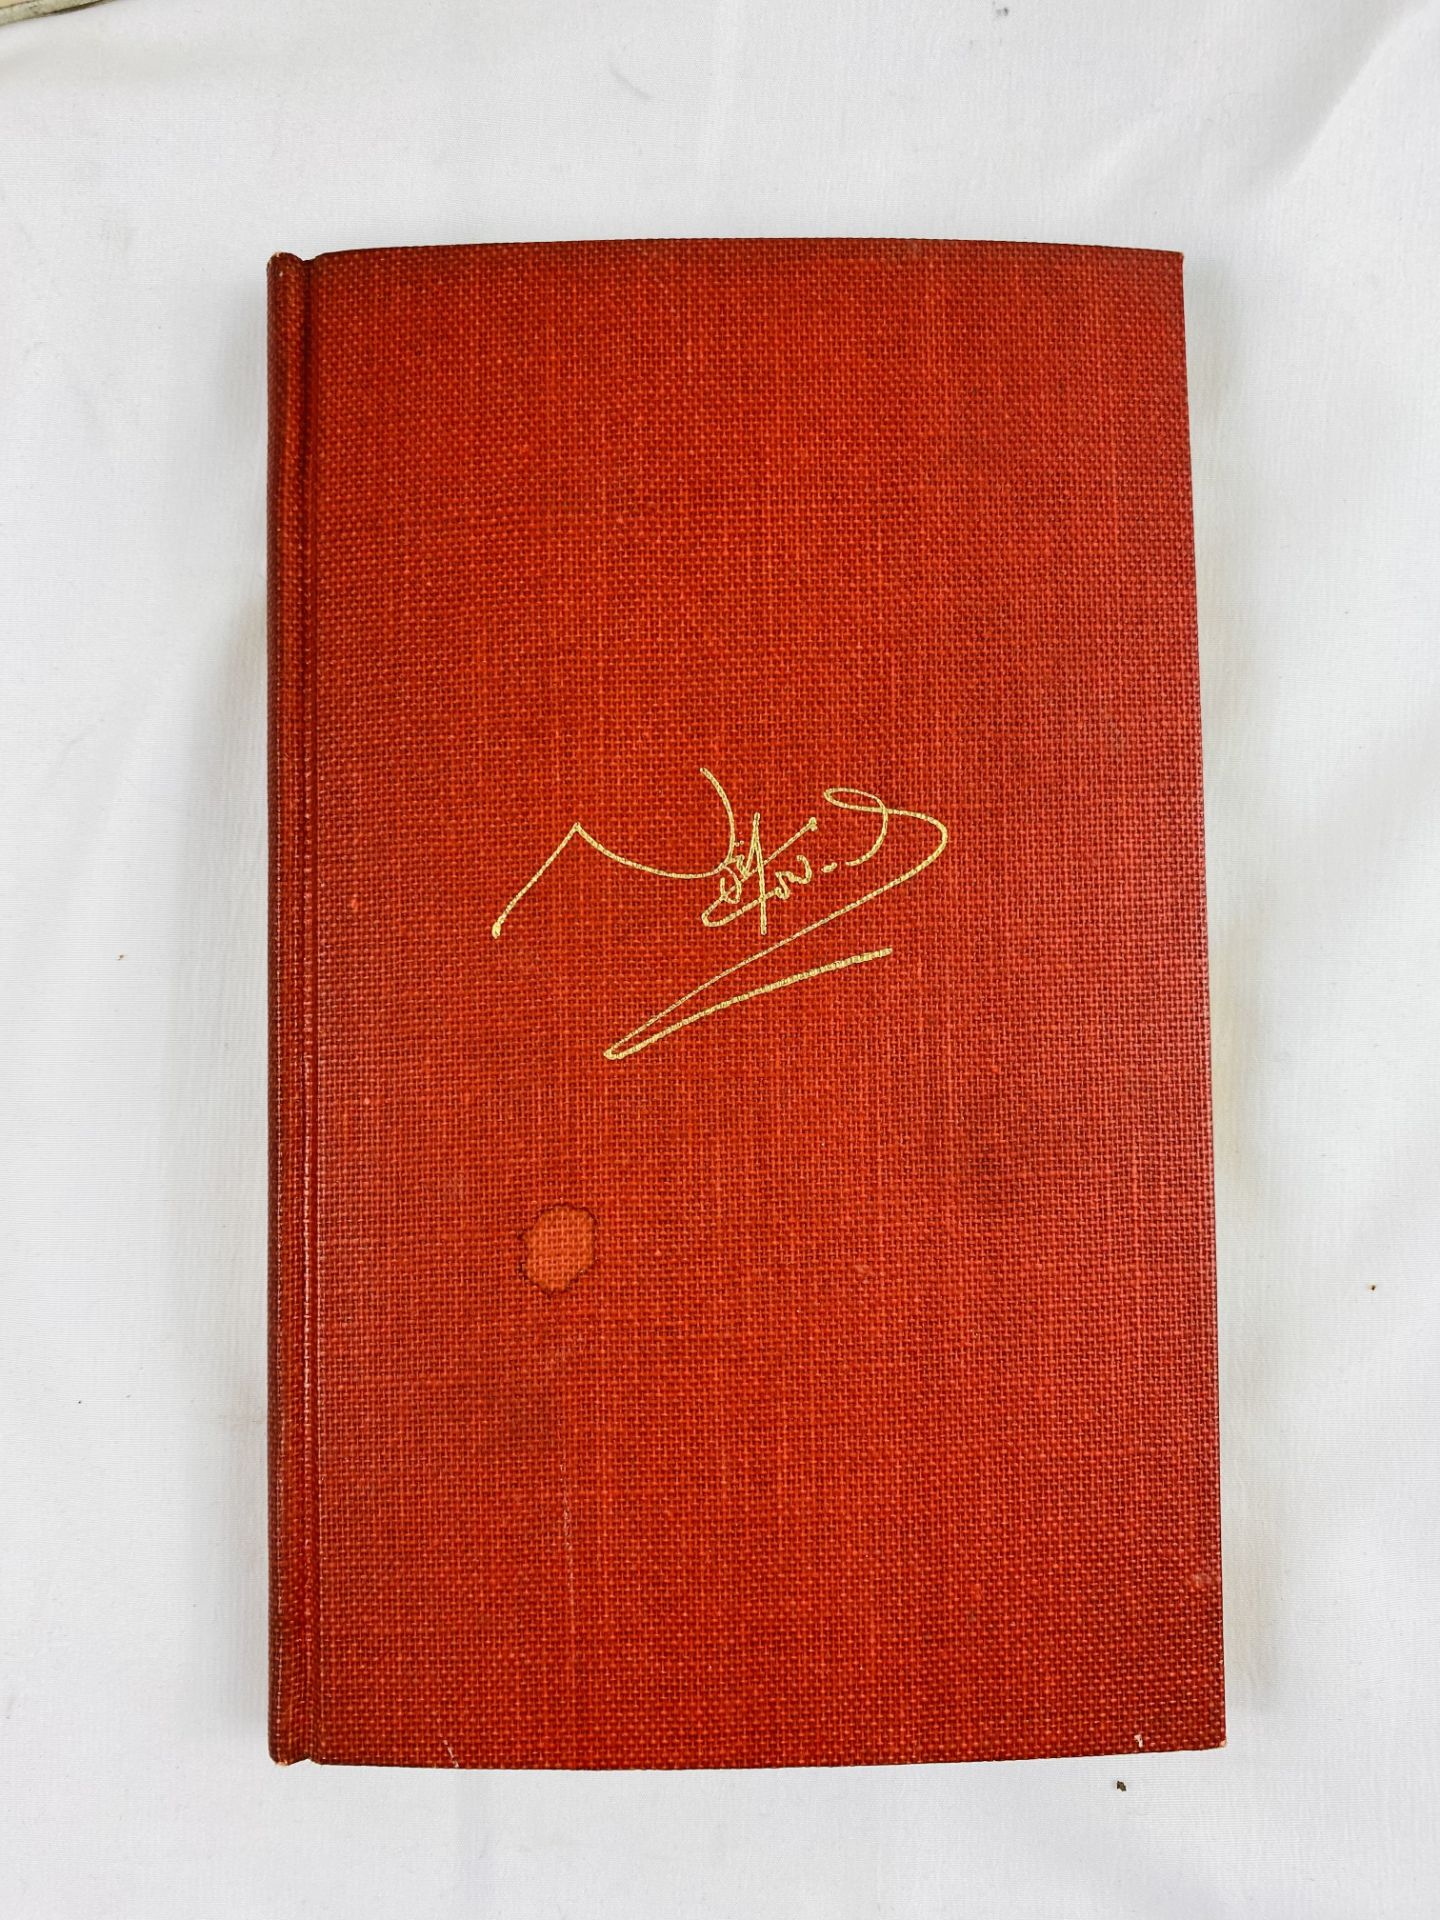 Noel Coward, Quadrille, together with two copies of The Art of Noel Coward by Robert Greacen - Image 4 of 6